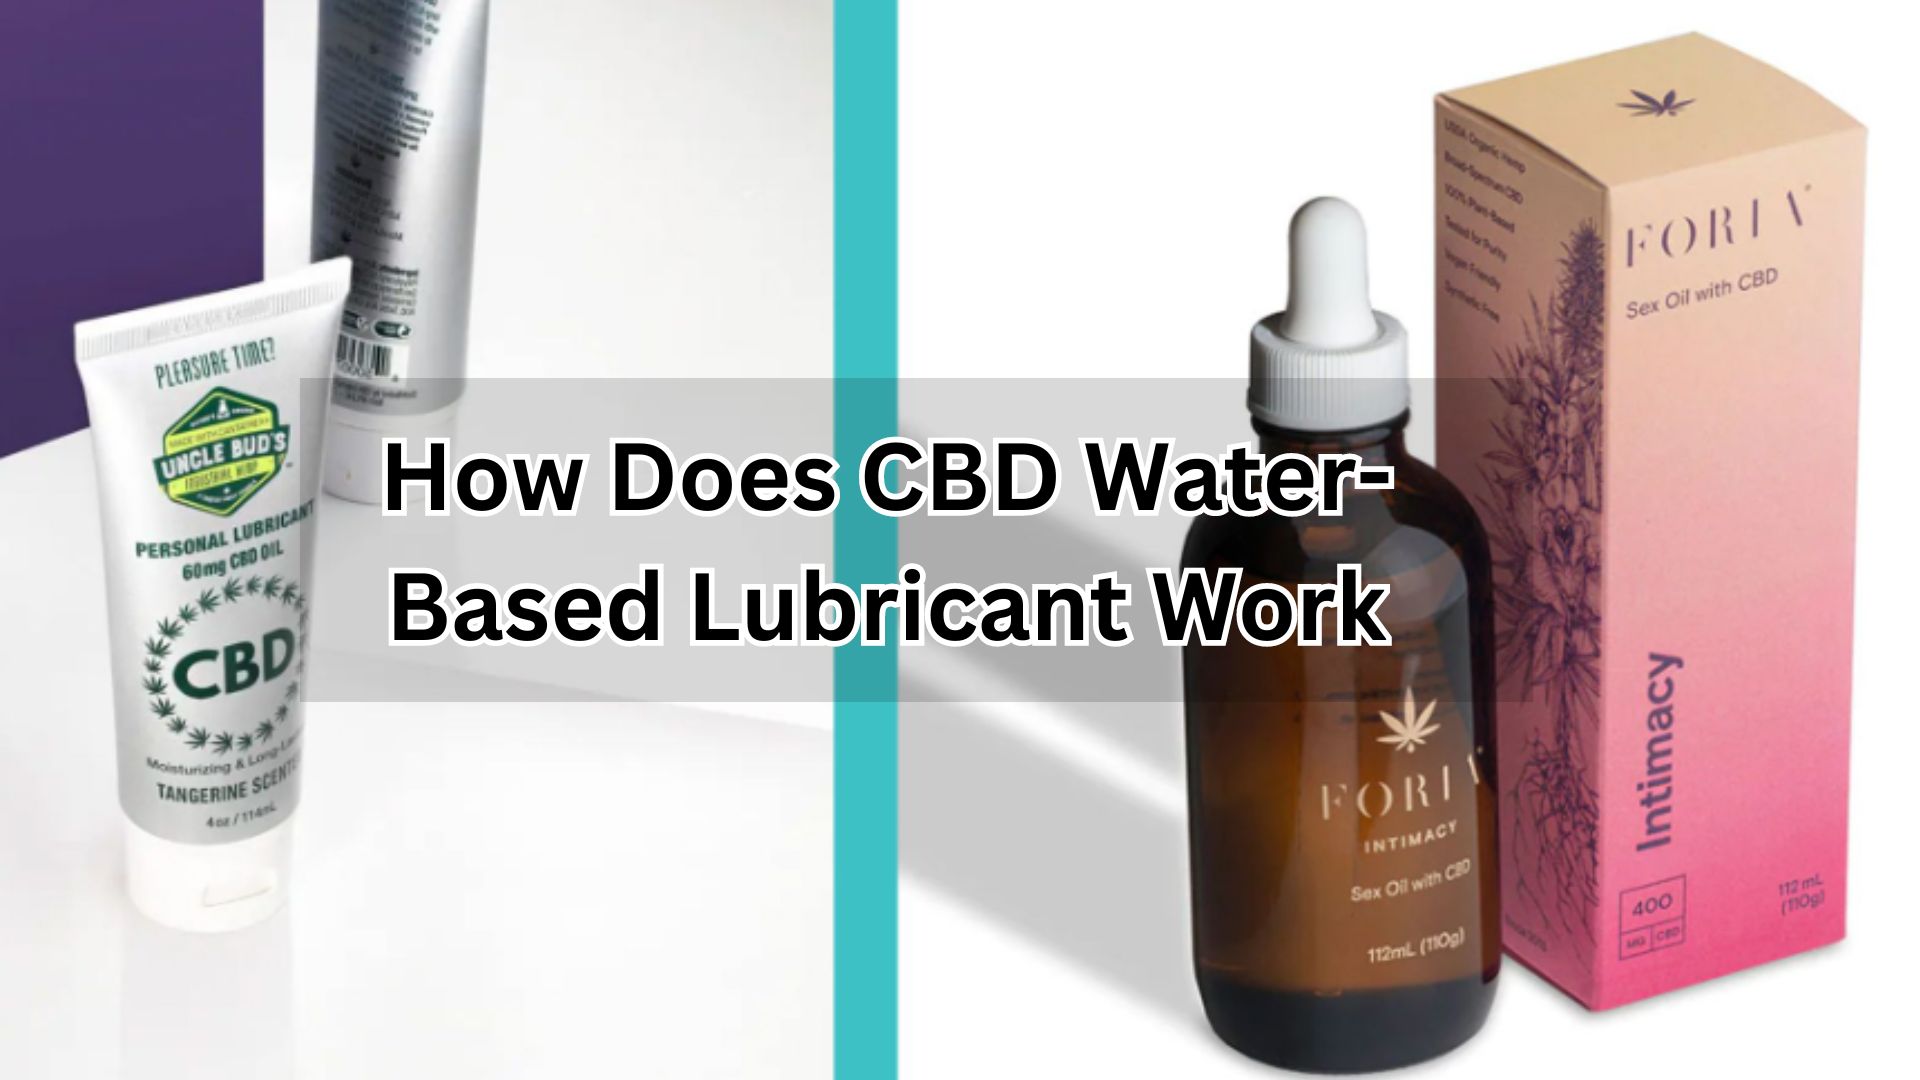 How Does CBD Water-Based Lubricant Work